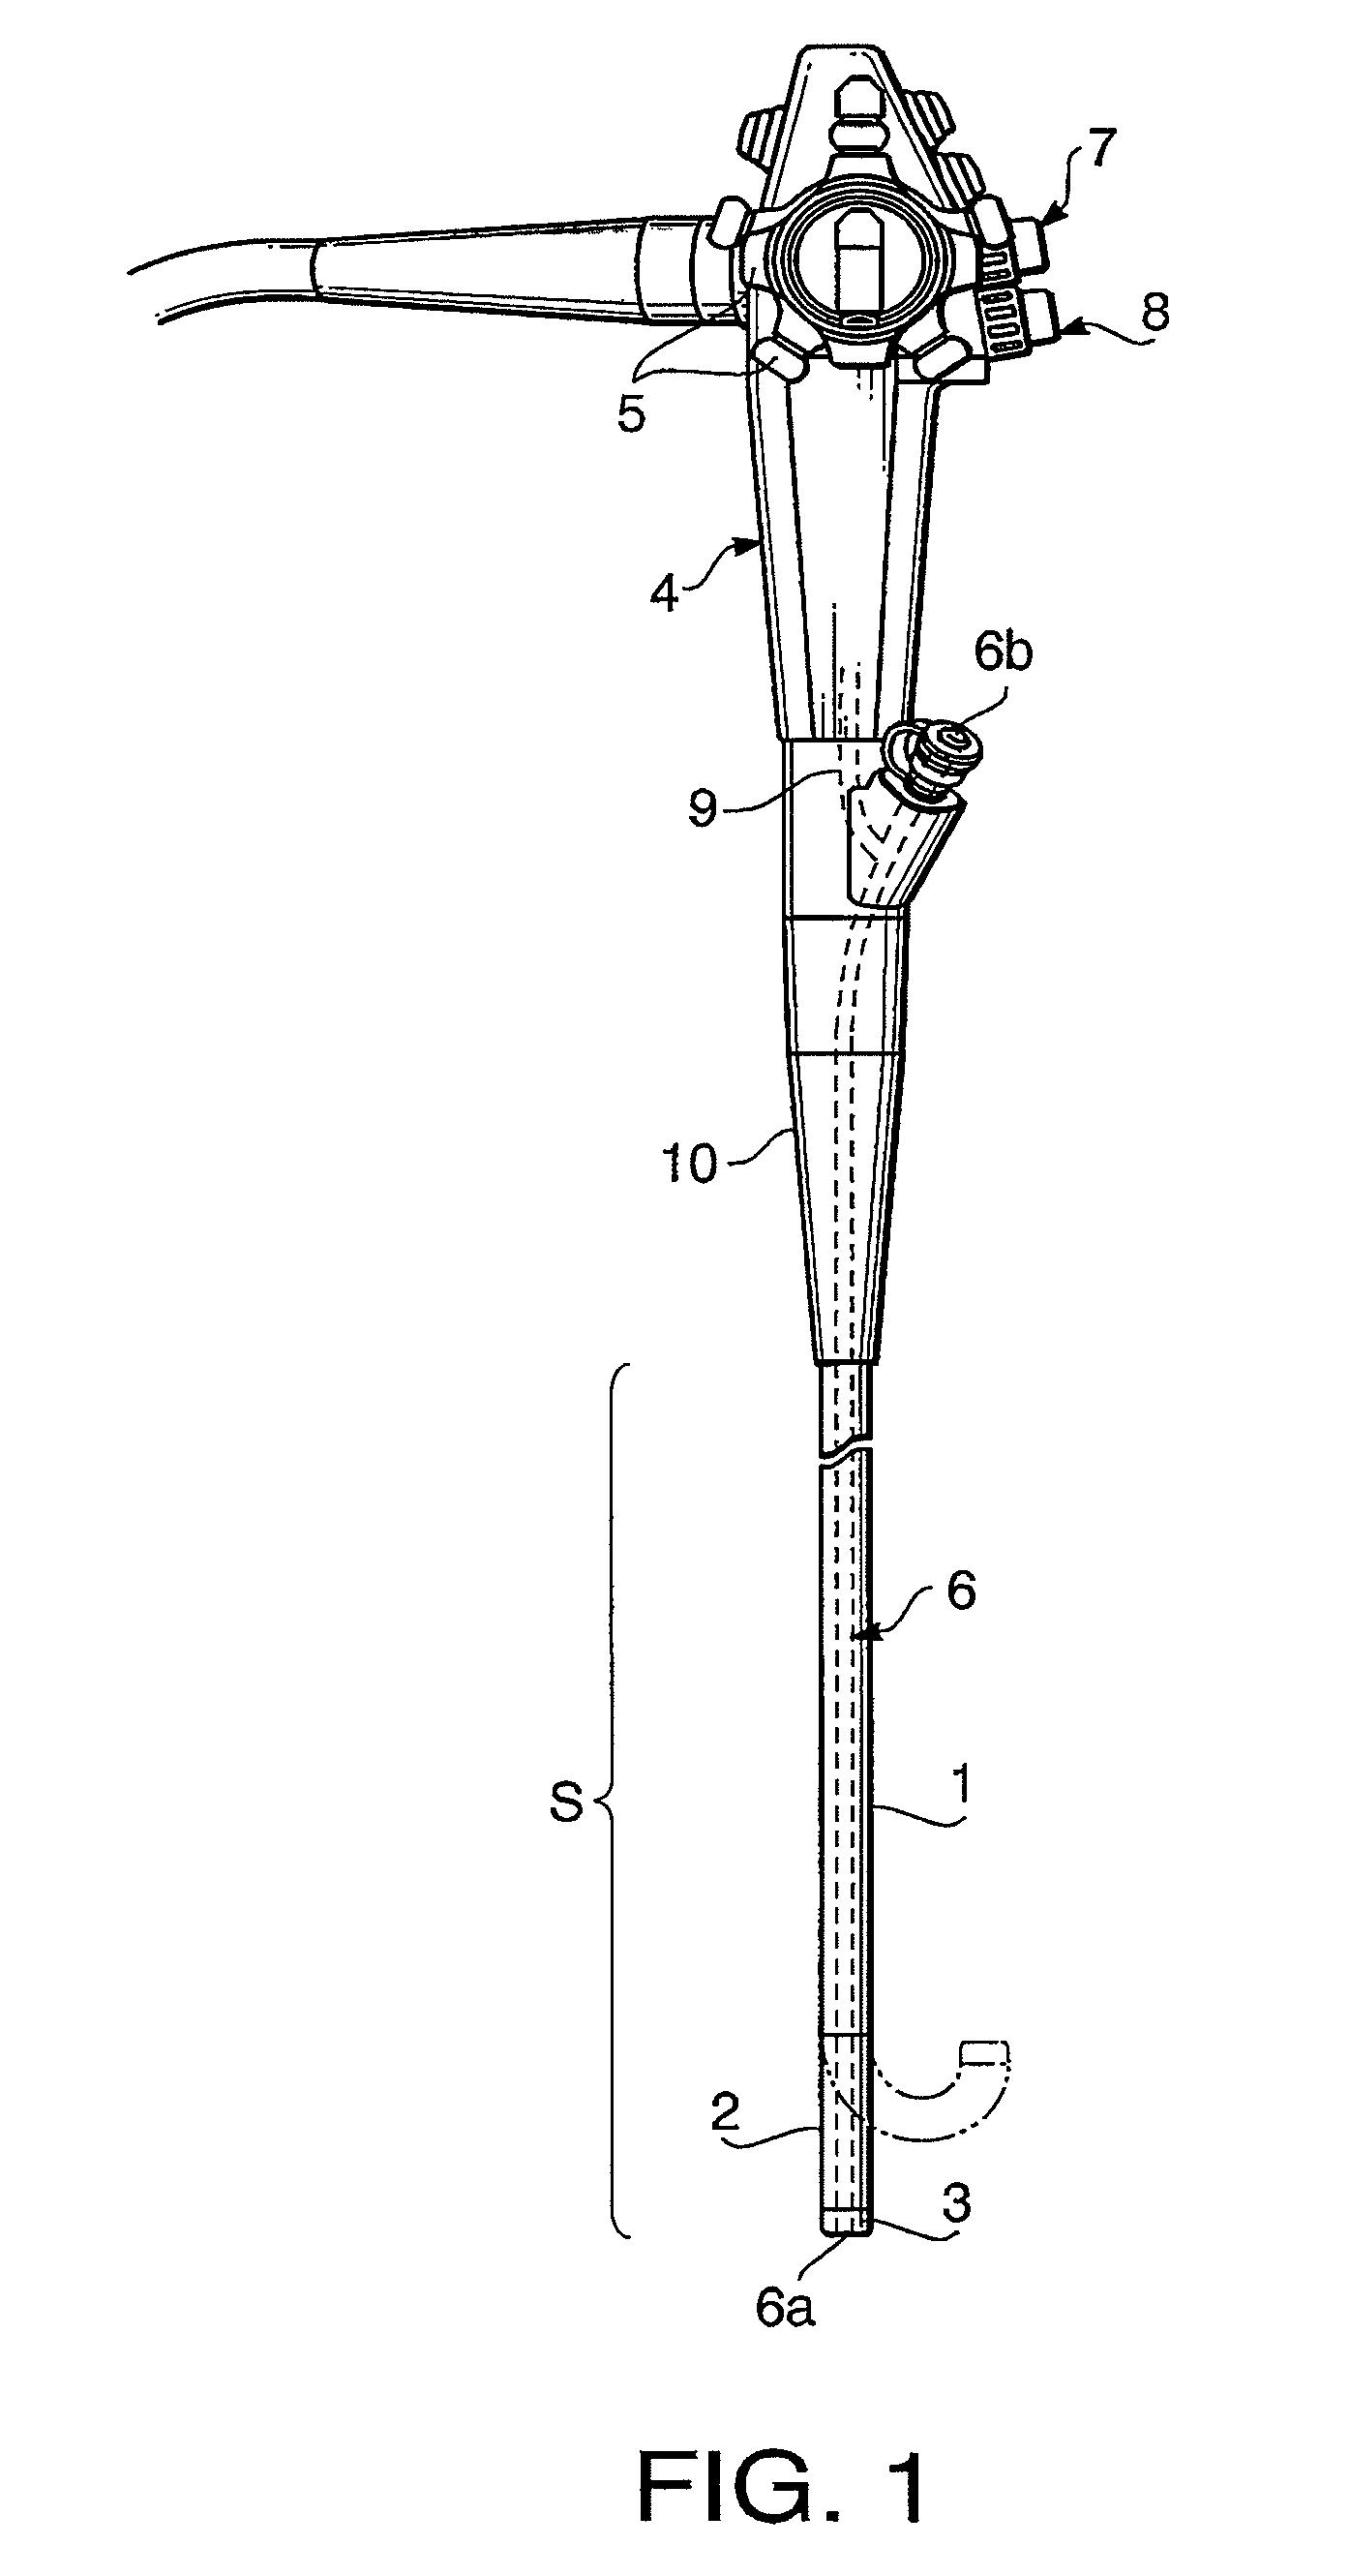 Treatment tool insertion channel of endoscope